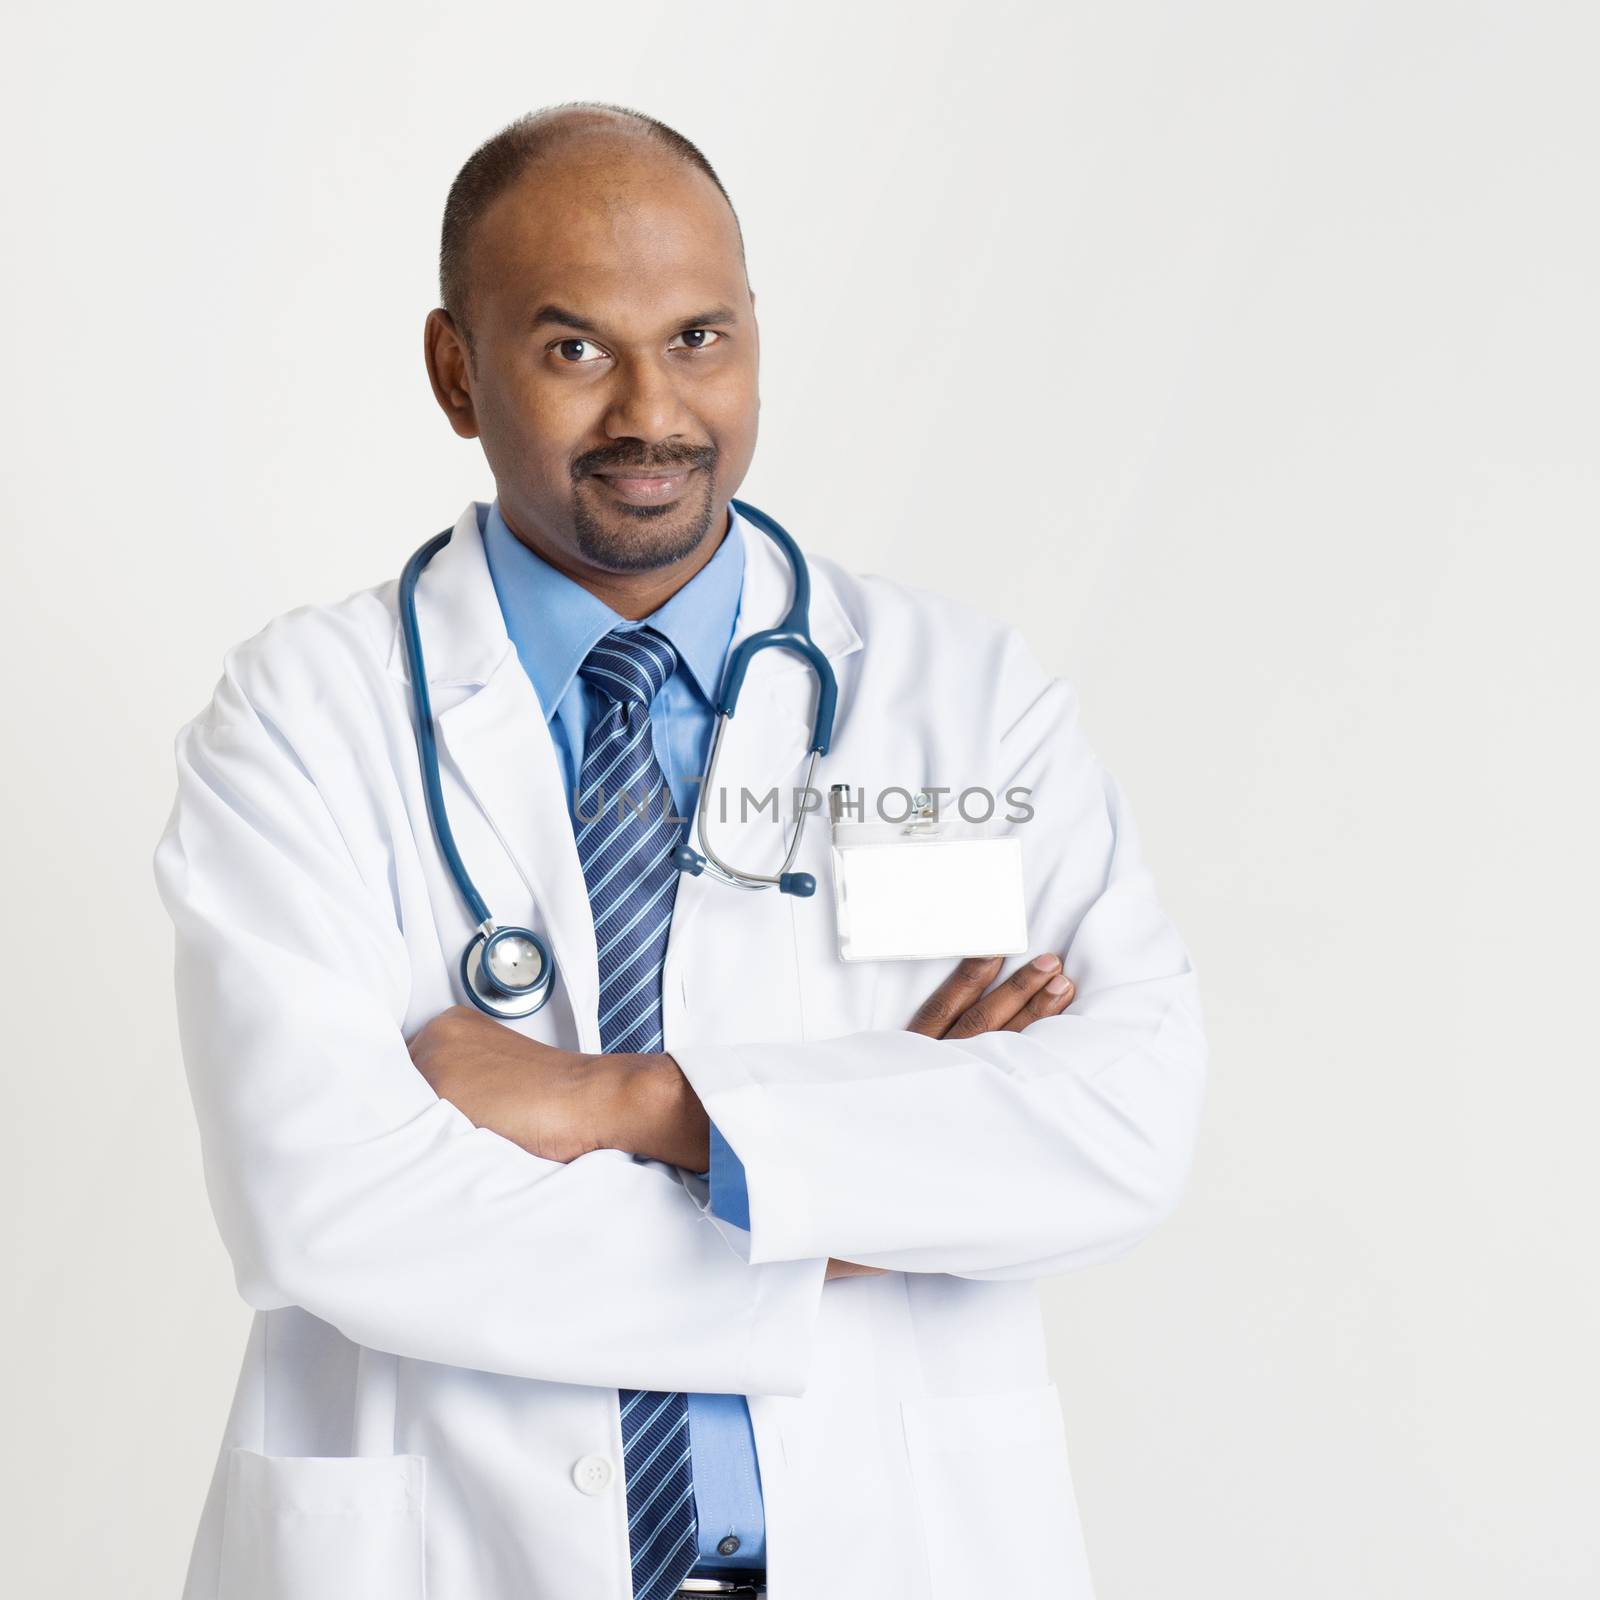 Portrait of mature Indian male medical doctor in uniform standing on plain background with shadow.